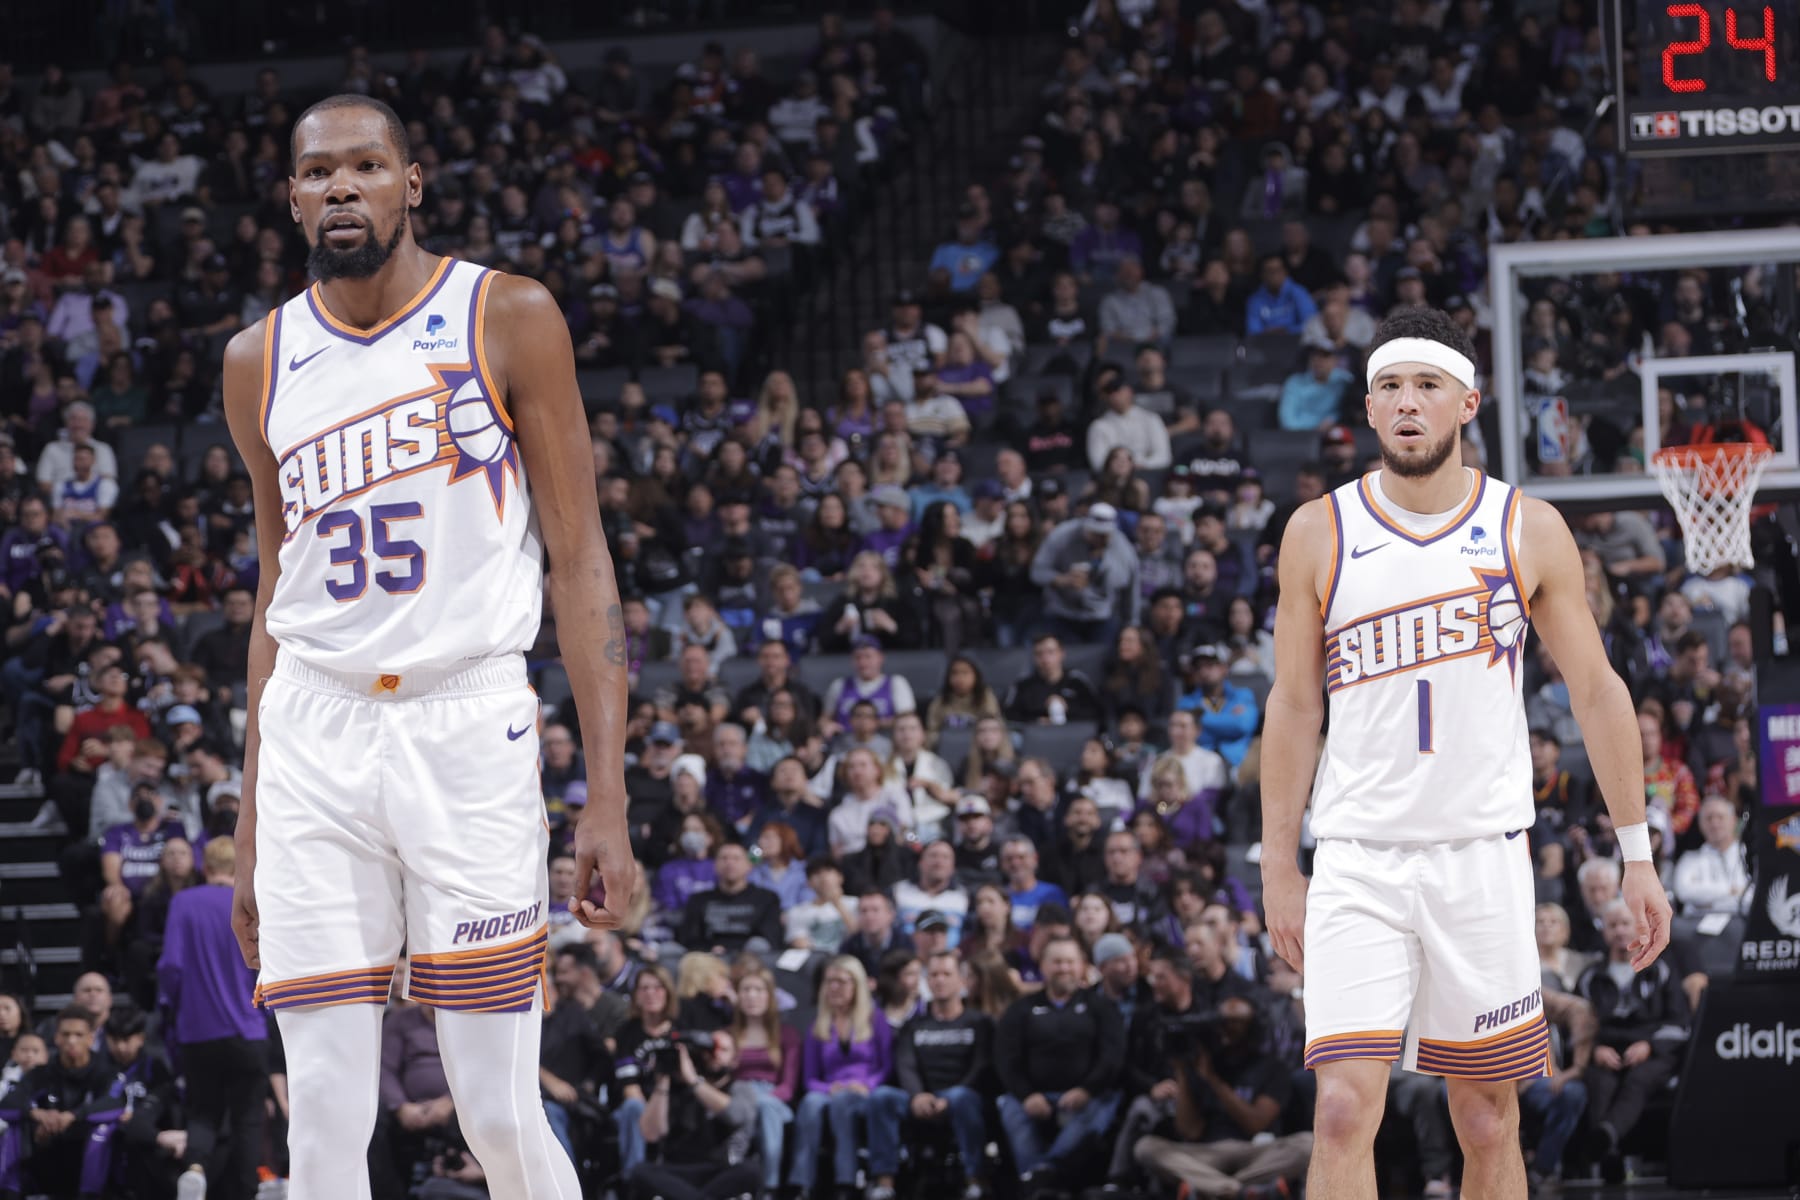 Kevin Durant, Top Suns Players to Watch vs. the Nuggets - December 1